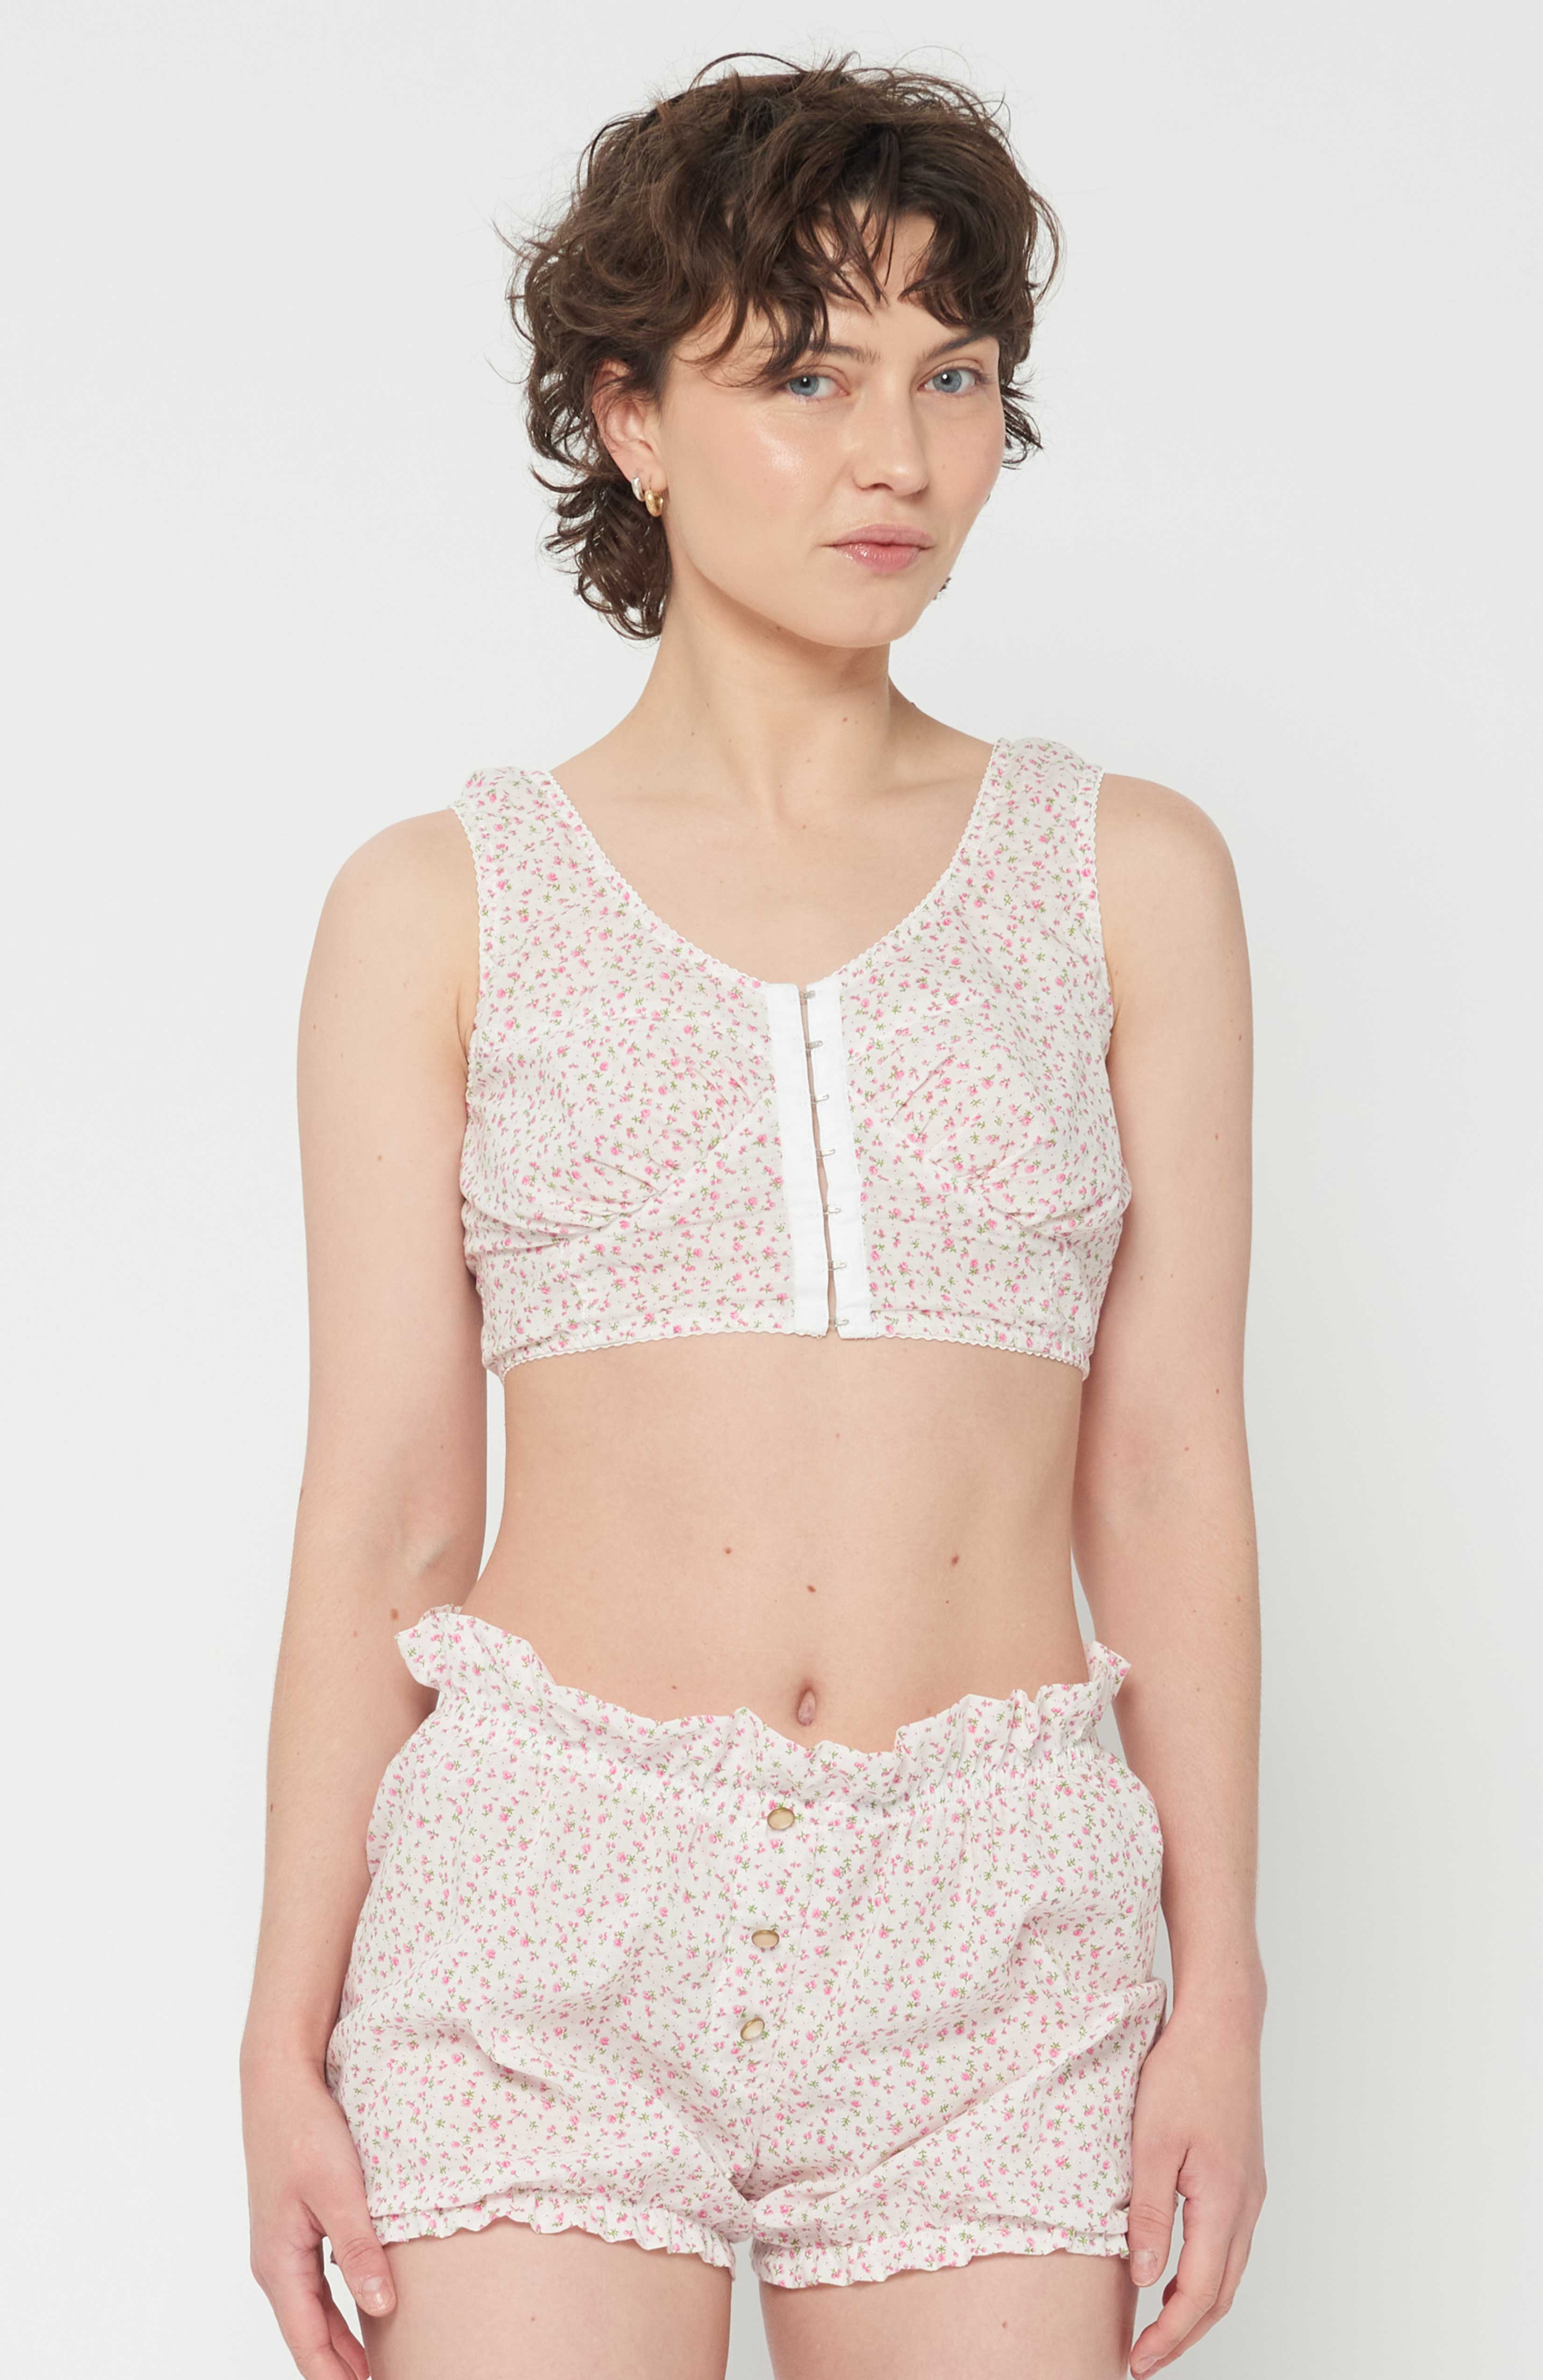 Maroske Peech playful cropped white floral bustier is an updated classic of an era gone by. The bust-line gathers facilitates and creates a feminine shape. Features scalloped lace elastic finishings, a tidy hook and eye centre front closure finishes off the sweatheart neckline. 